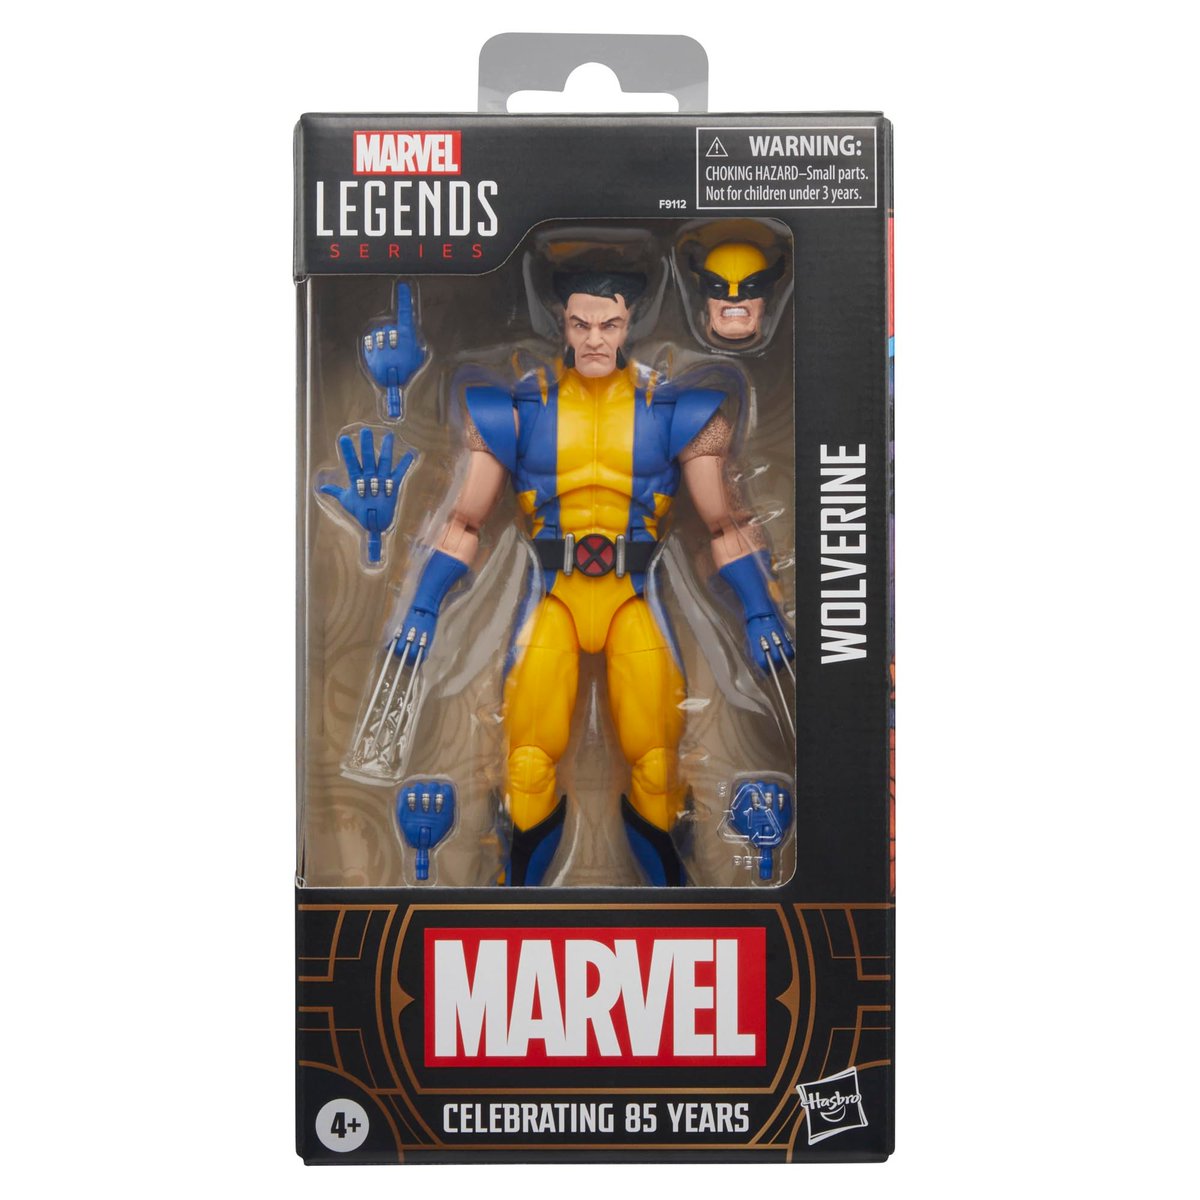 New Hasbro Marvel Legends Superior Spider-Man & Astonishing Wolverine are up for preorder on Amazon ($24.99 each): Spider-Man - amzn.to/49ypdbC Wolverine - amzn.to/443vQl3 All Marvel Legends preorders - amzn.to/3JmUW4O #ad